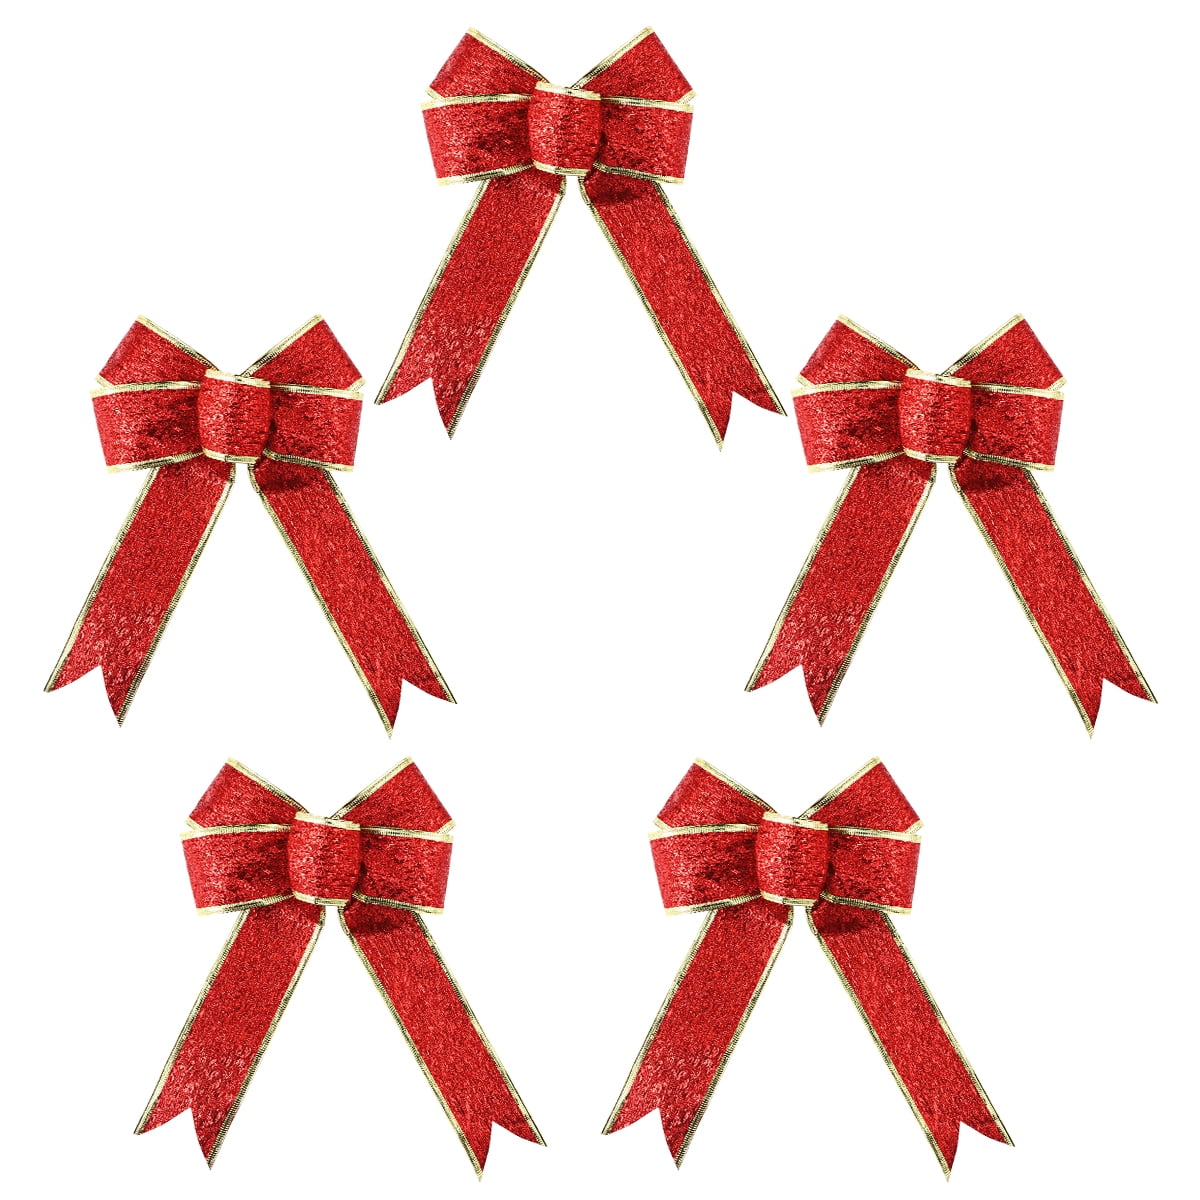 SUPVOX 5PCS Glittering Fabric Christmas Ribbon Bow Gift Knot Ribbon  Ornaments for Christmas Tree Presents Decoration (Red)